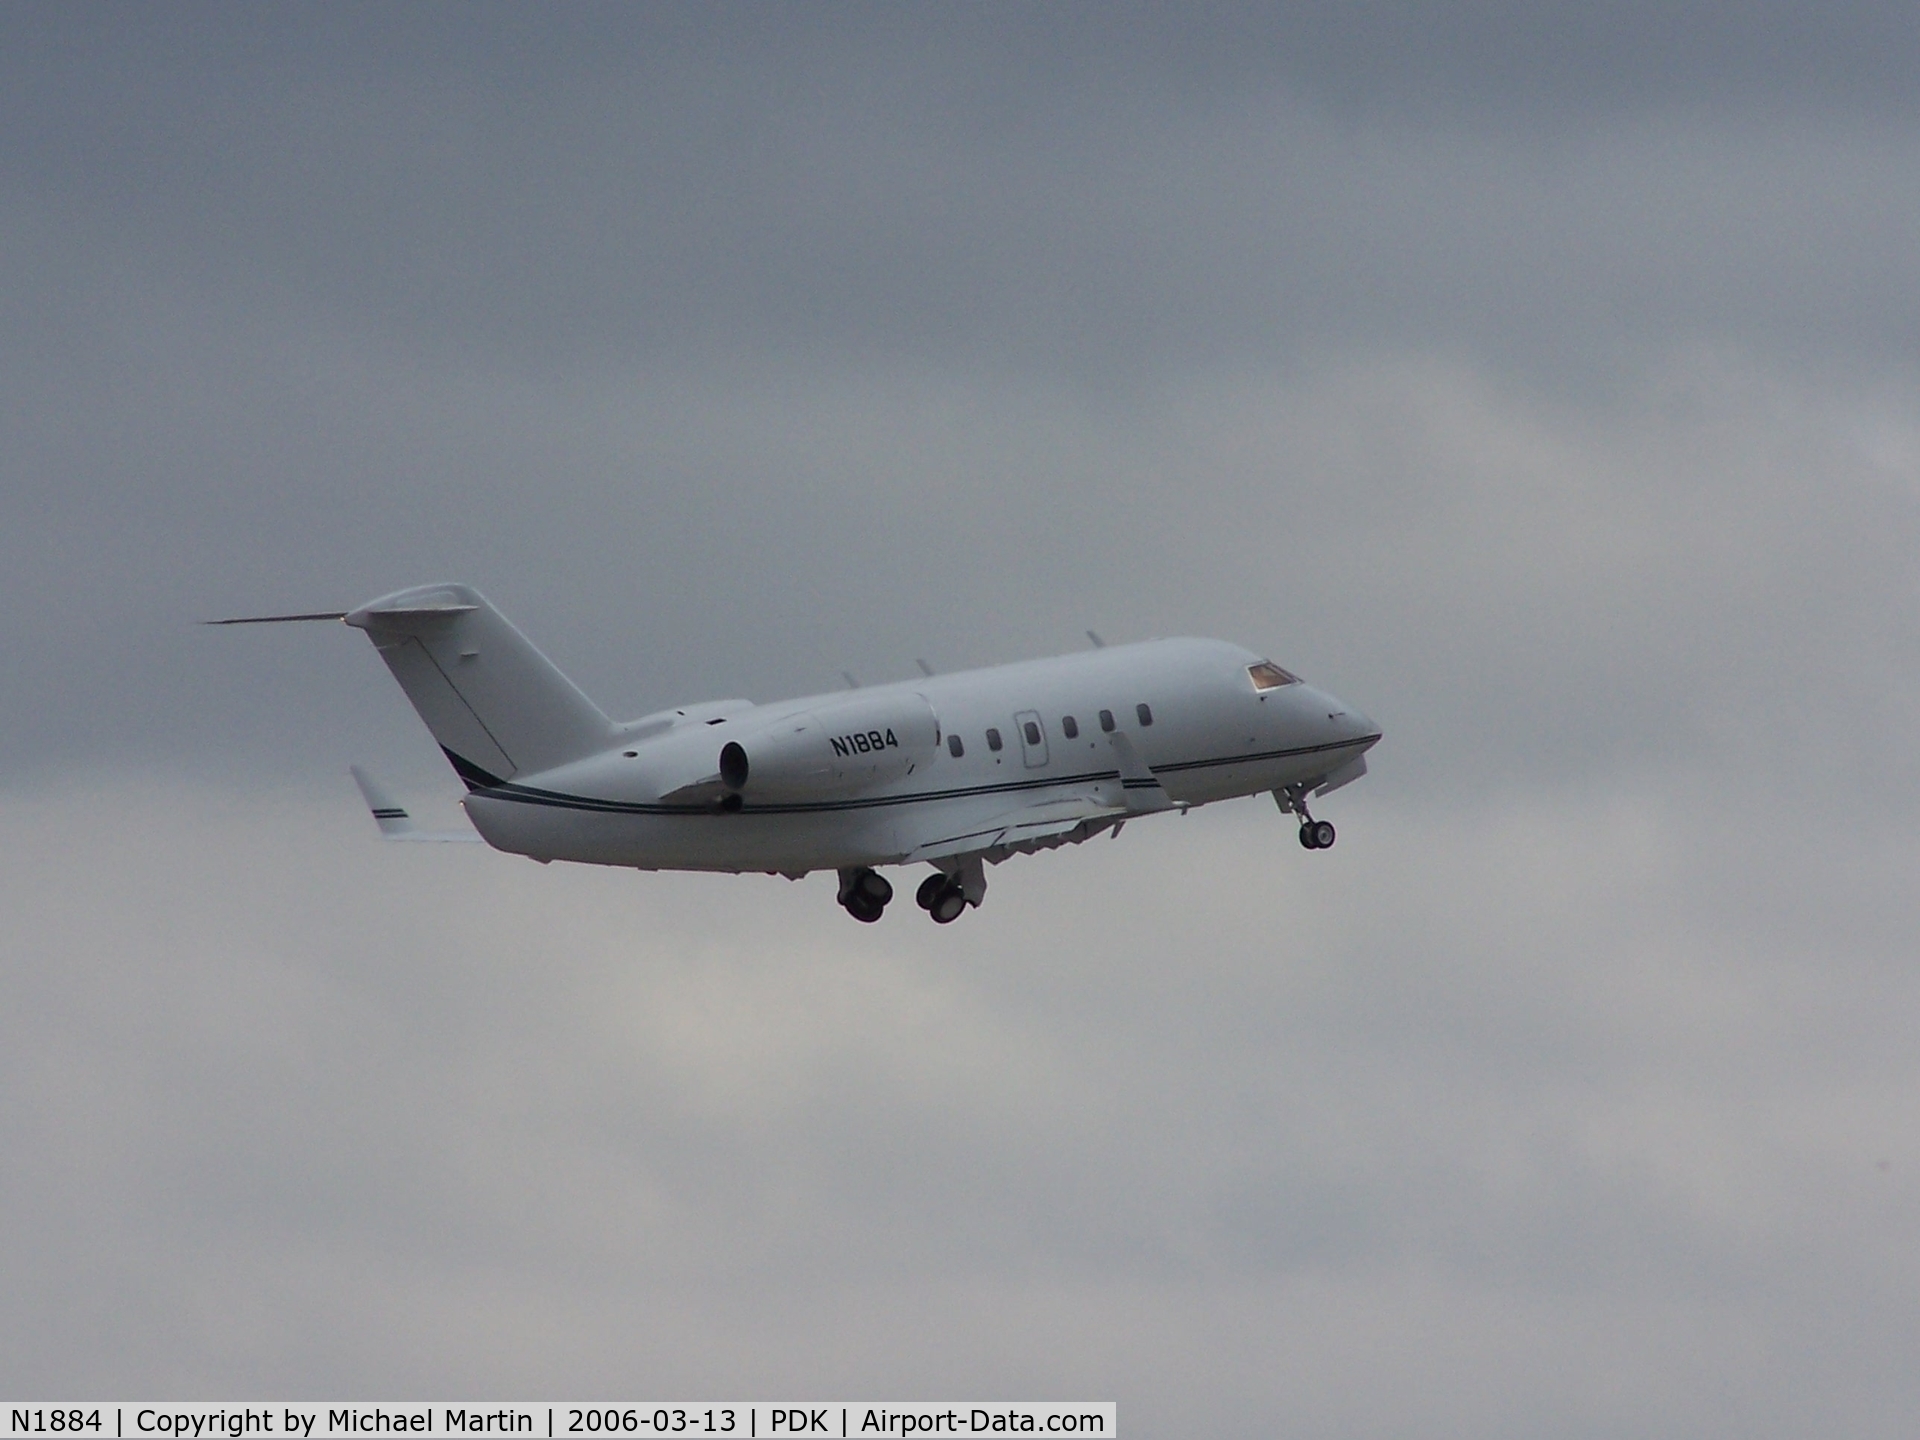 N1884, 1981 Canadair Challenger 600 (CL-600-1A11) C/N 1032, Departing PDK in a hurry!